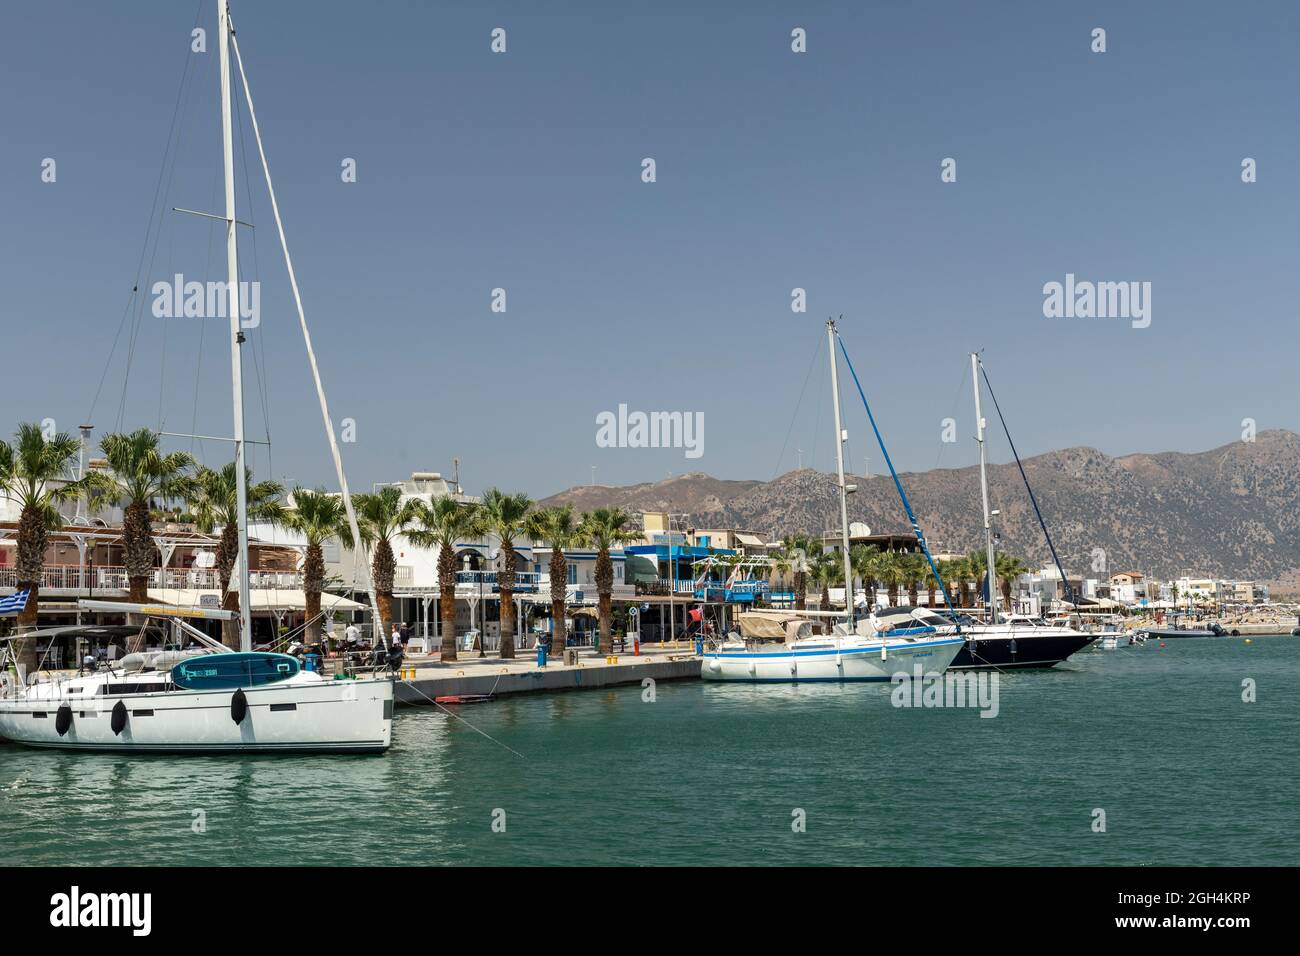 Fishing boats in Kardamena harbour, The island of Kos, Dodecanese Islands, Greece Stock Photo